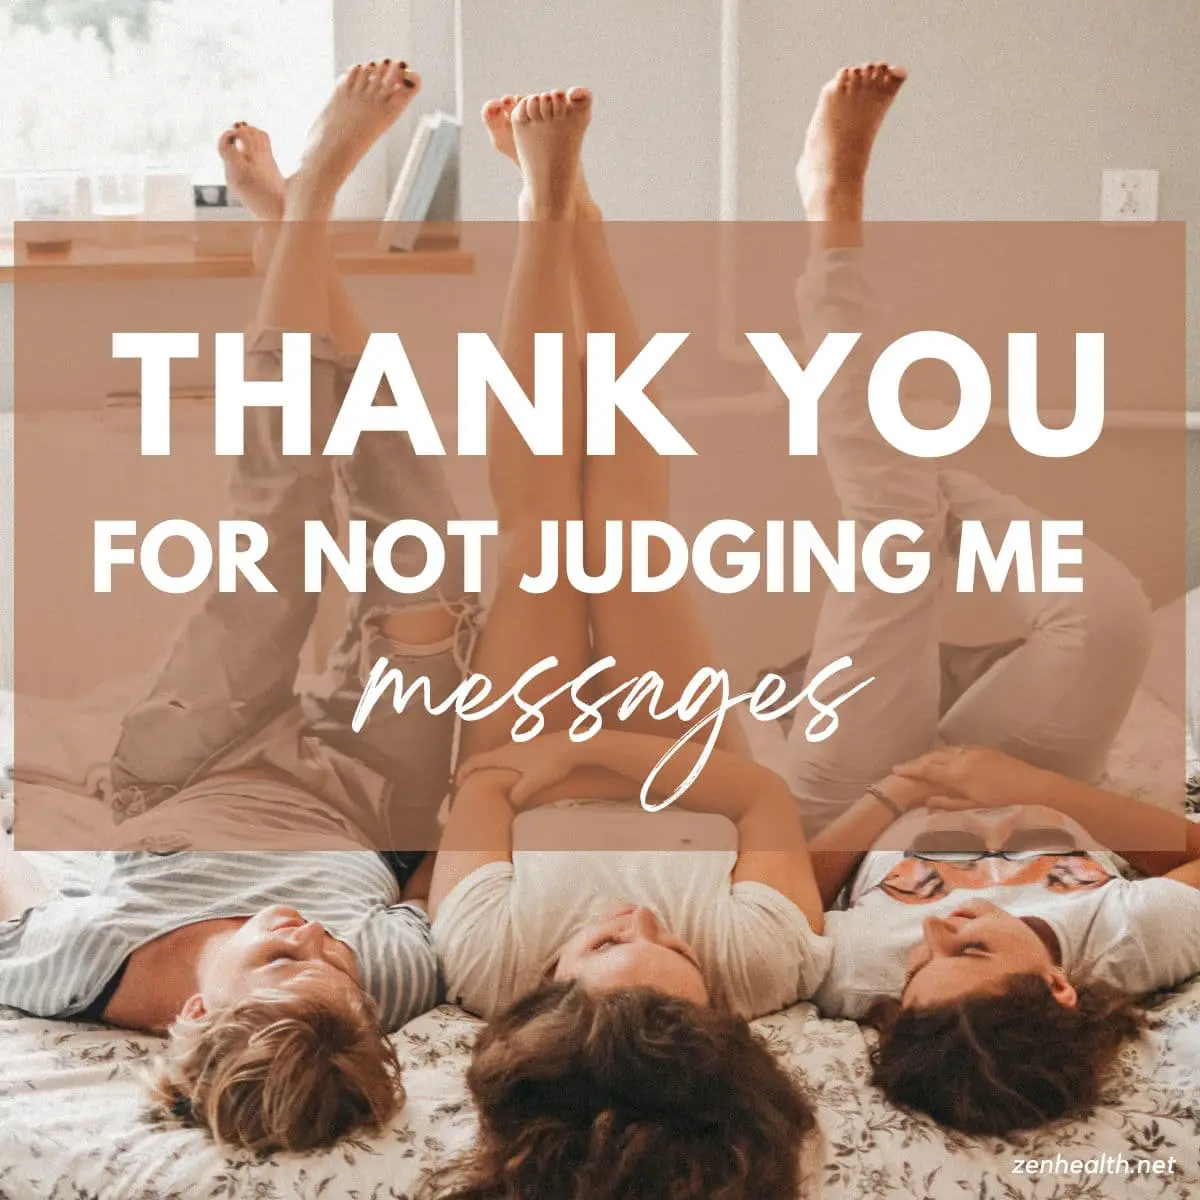 "thank you for not judging me messages" text overlay on a photo of 3 women lying on a bed chatting with their legs in the air